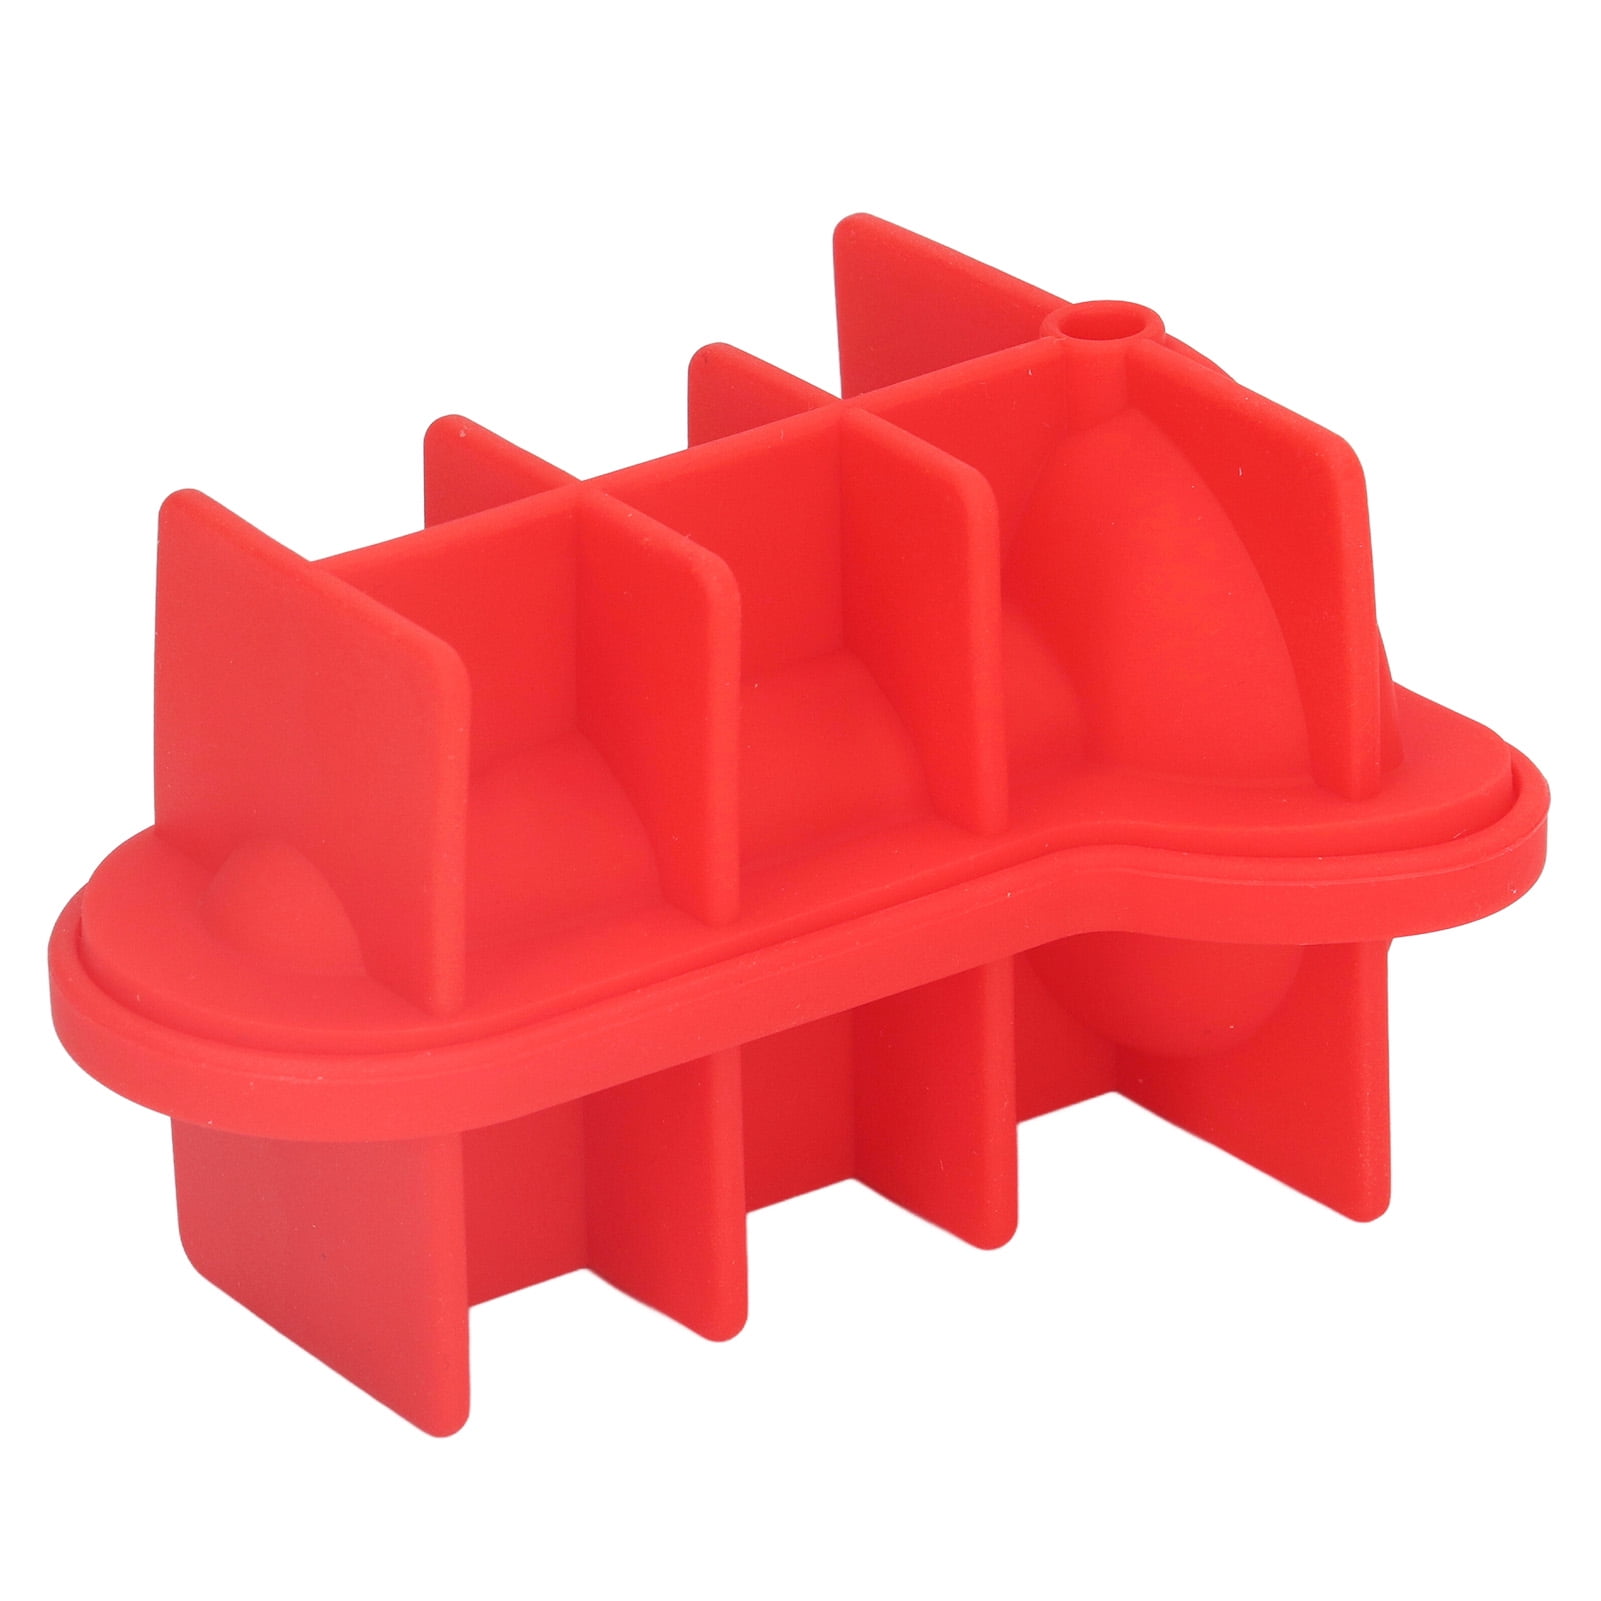 HEITIGN Silicone Ice Cube Tray Funny Silicone Ice Cube Mold 3D Adult Spoof  Ice Tray with Lid Fun Shape Multipurpose Molds Great for Parties Events Red